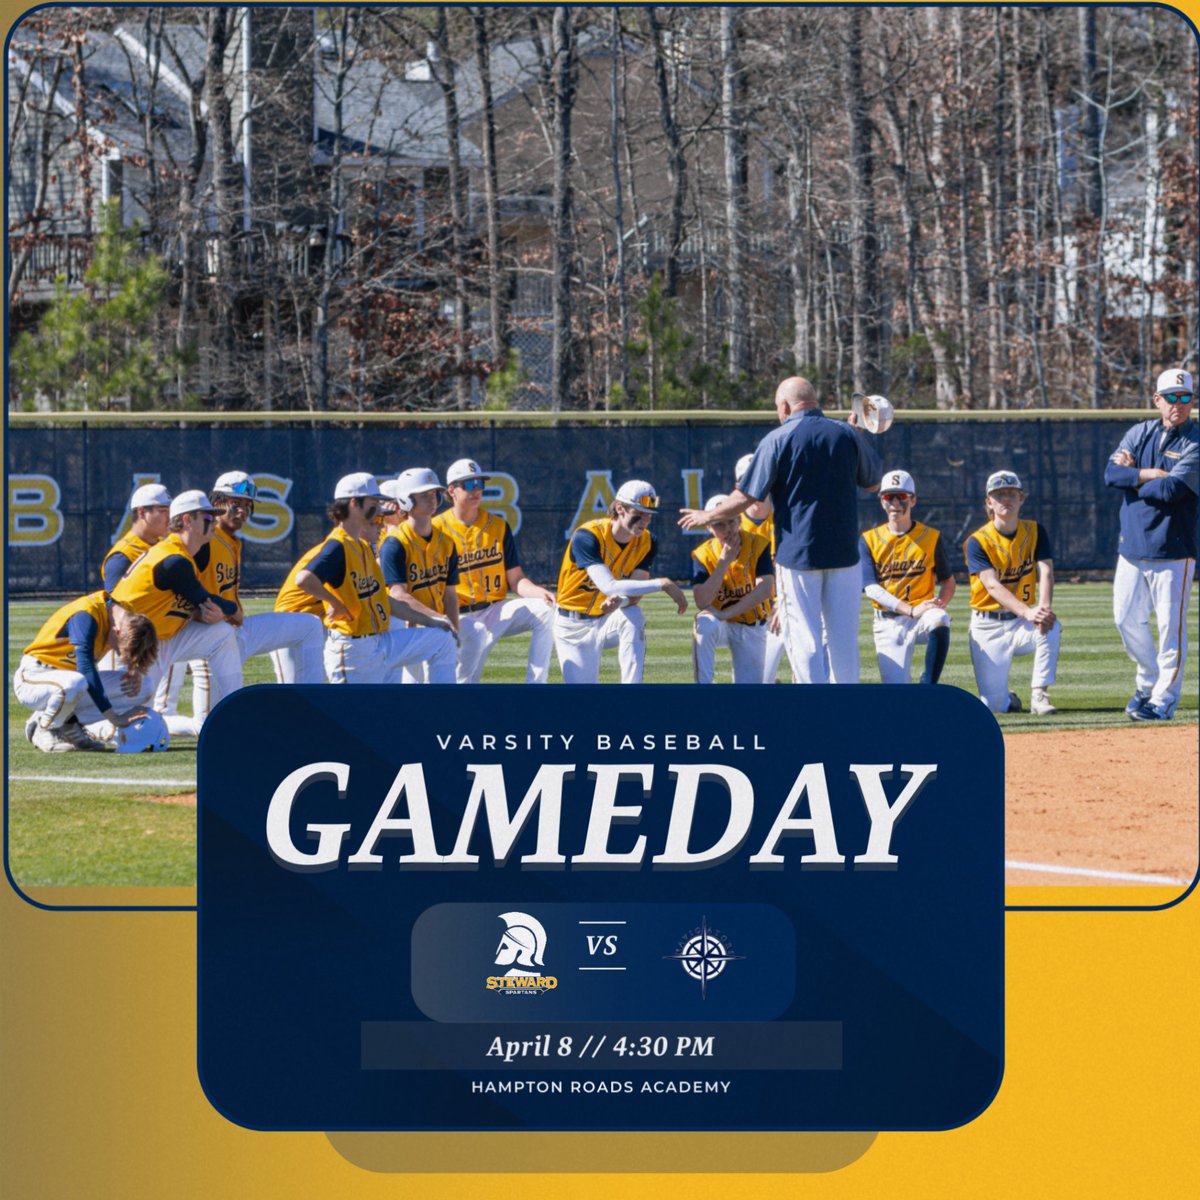 Wishing the varsity baseball team good luck as they travel to Hampton Roads Academy for a 4:30pm start against the Navigators! #GoSpartans #804varsity @henricosports